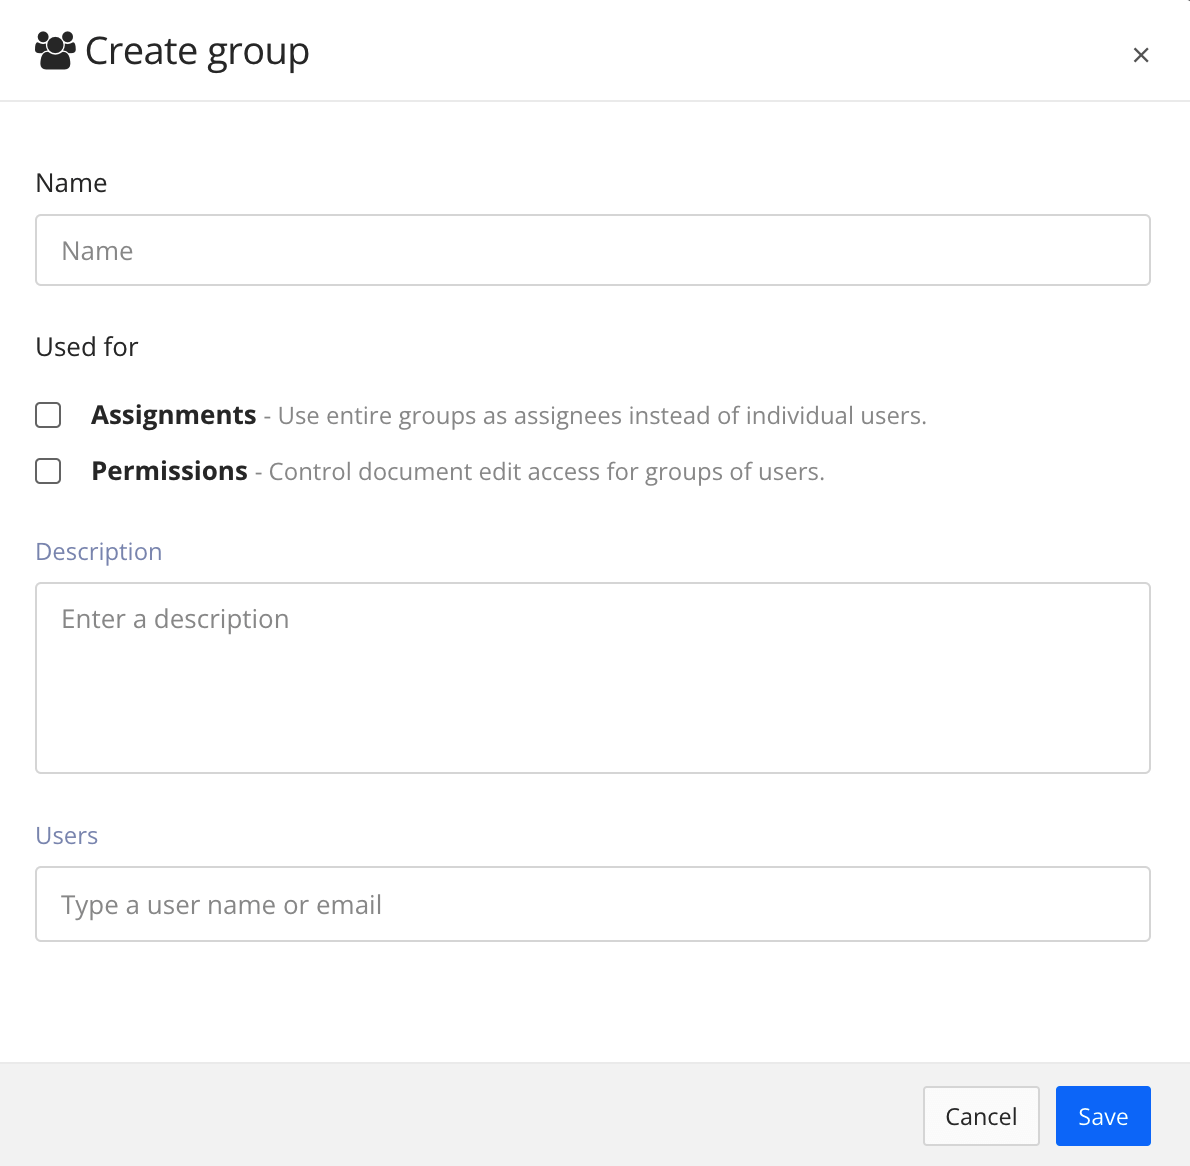 Create group dialog. There are settings for adding a name, description, and users. There are also checkboxes for choosing the type of group.